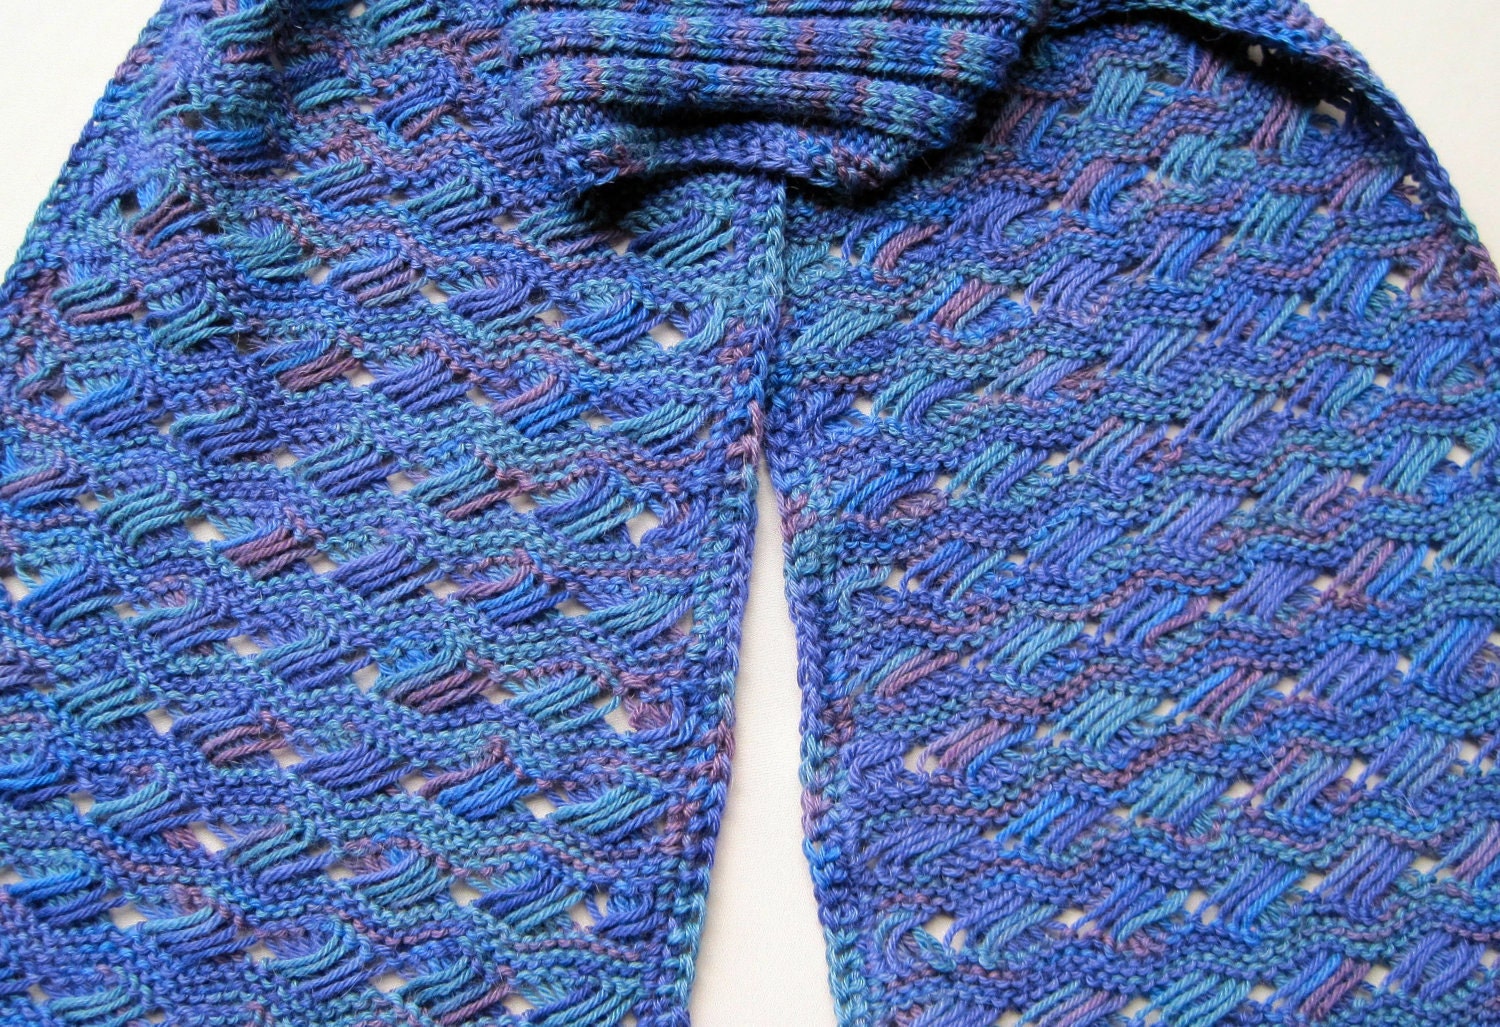 Free Knitting Pattern -
 Moebius Scarf - The Original from the